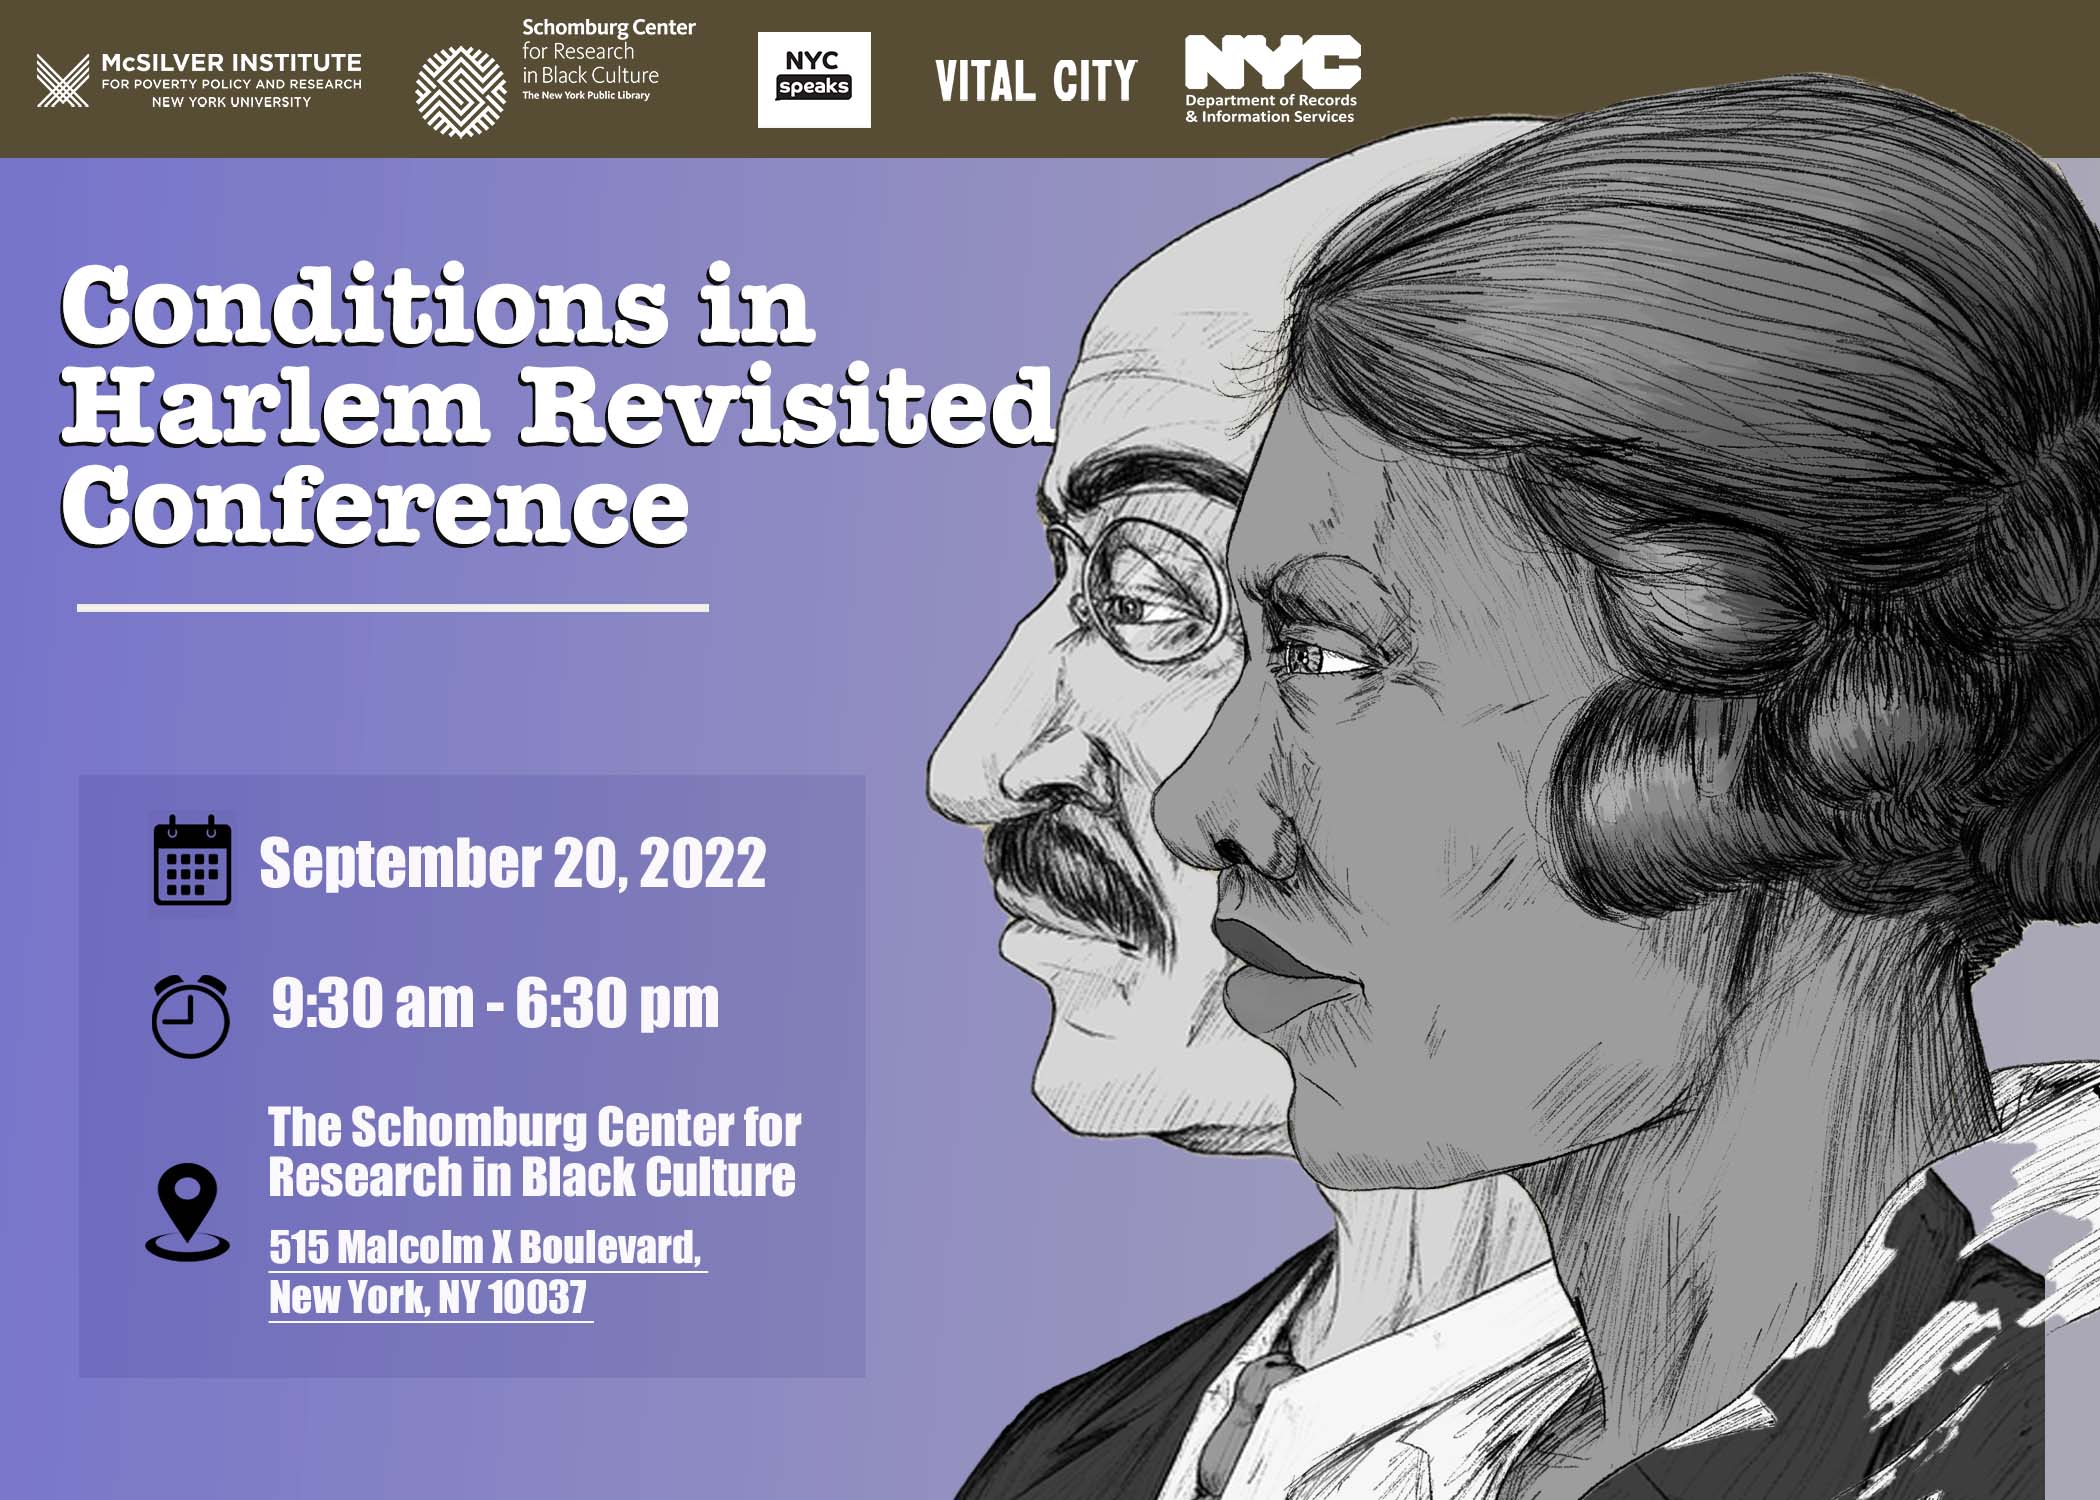 Announcement of the conference featuring a drawing in gray tones of a man wearing glasses and a woman, both in profile, looking off to the left side of the page with stern expressions on their faces.